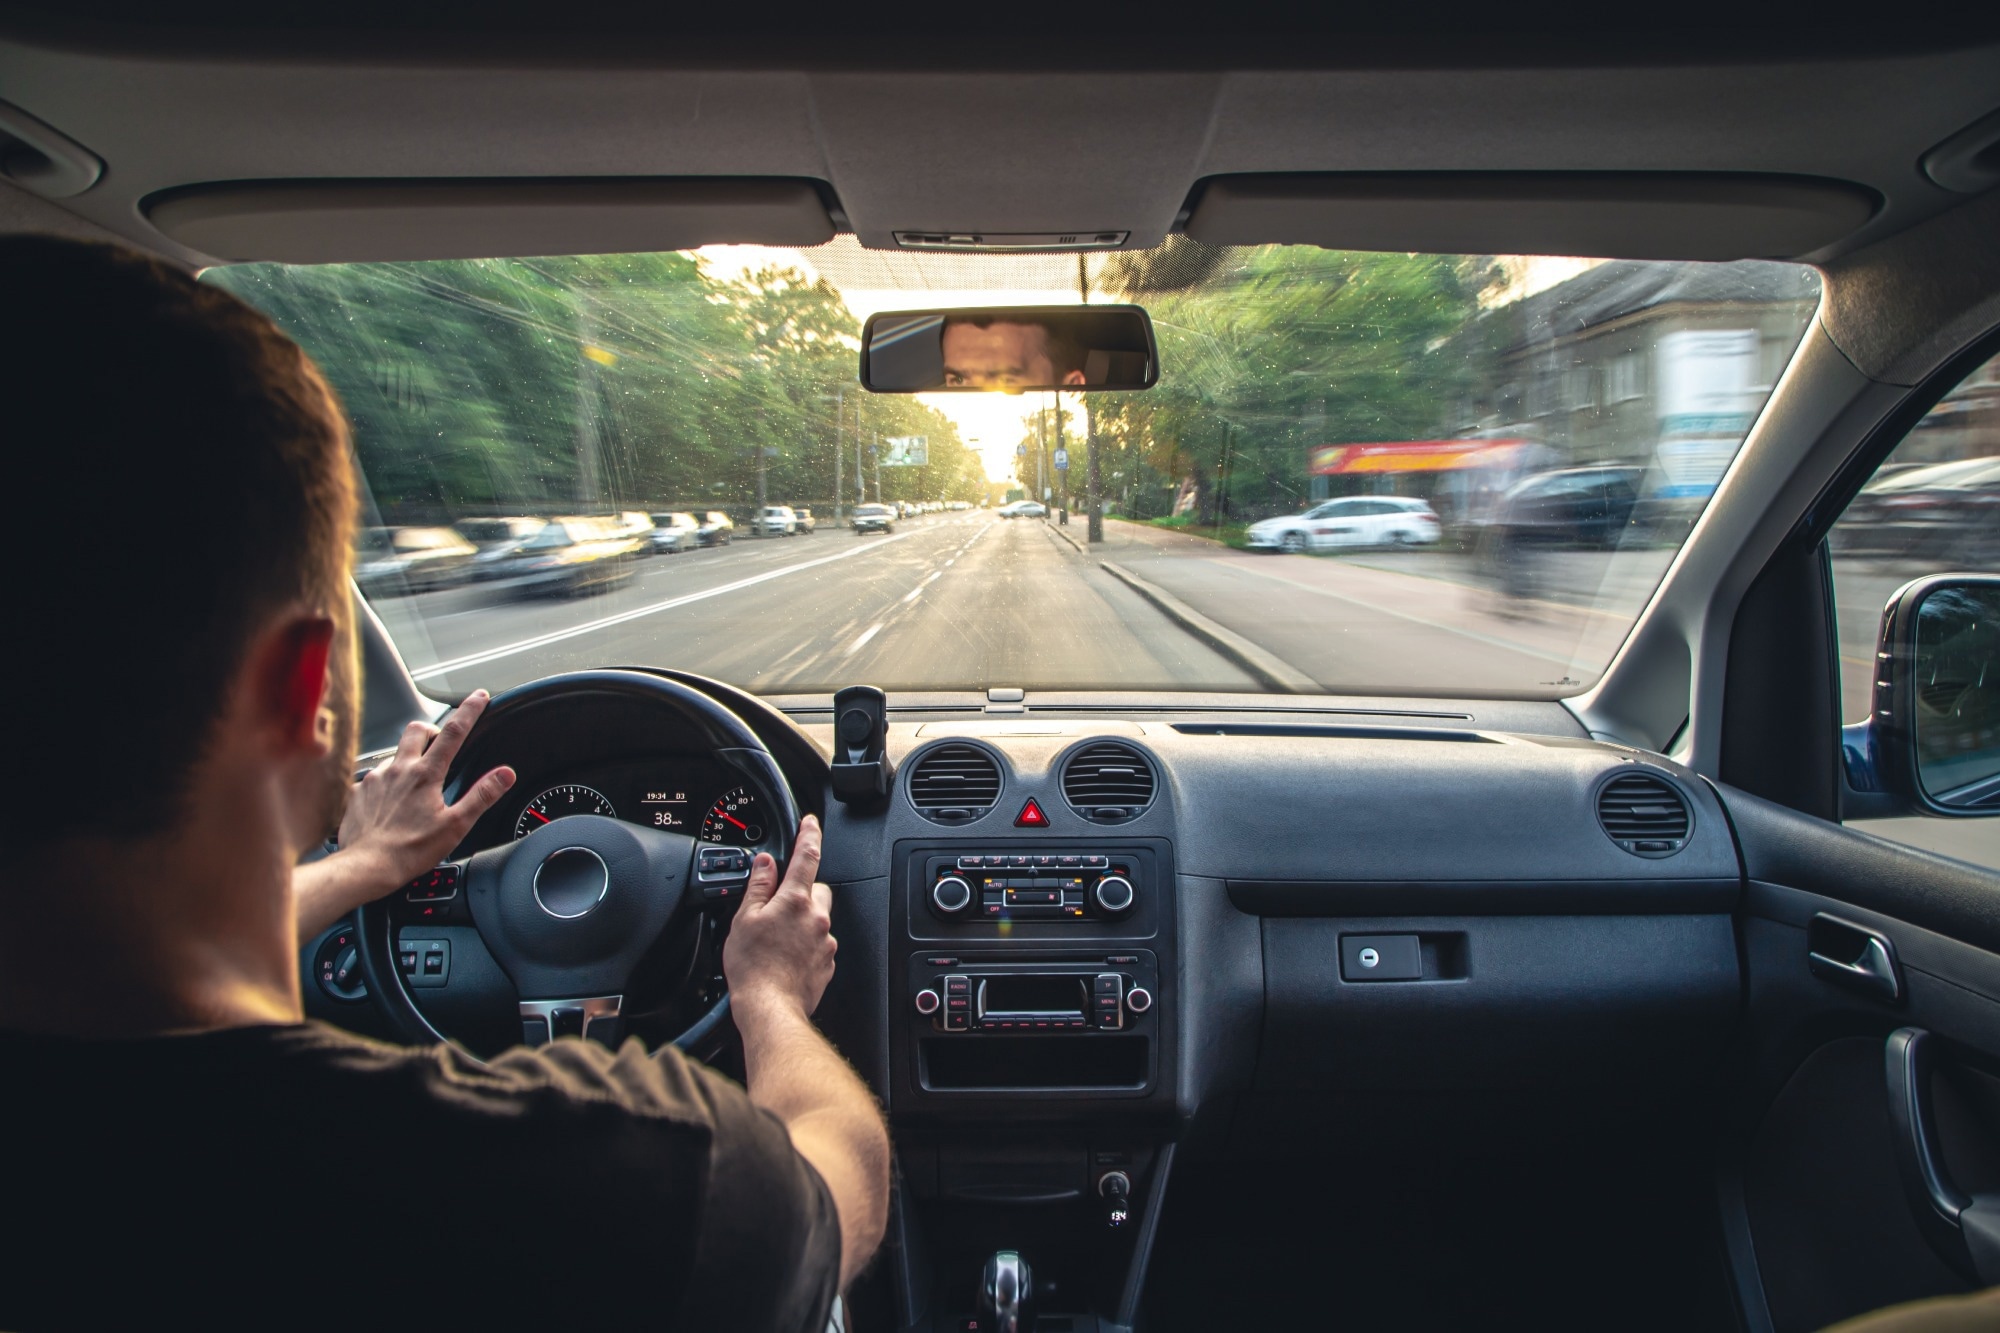 Study: Motor Vehicle Crash Risk in Older Adult Drivers With Attention-Deficit/Hyperactivity Disorder. Image Credit: PV productions/Shutterstock.com